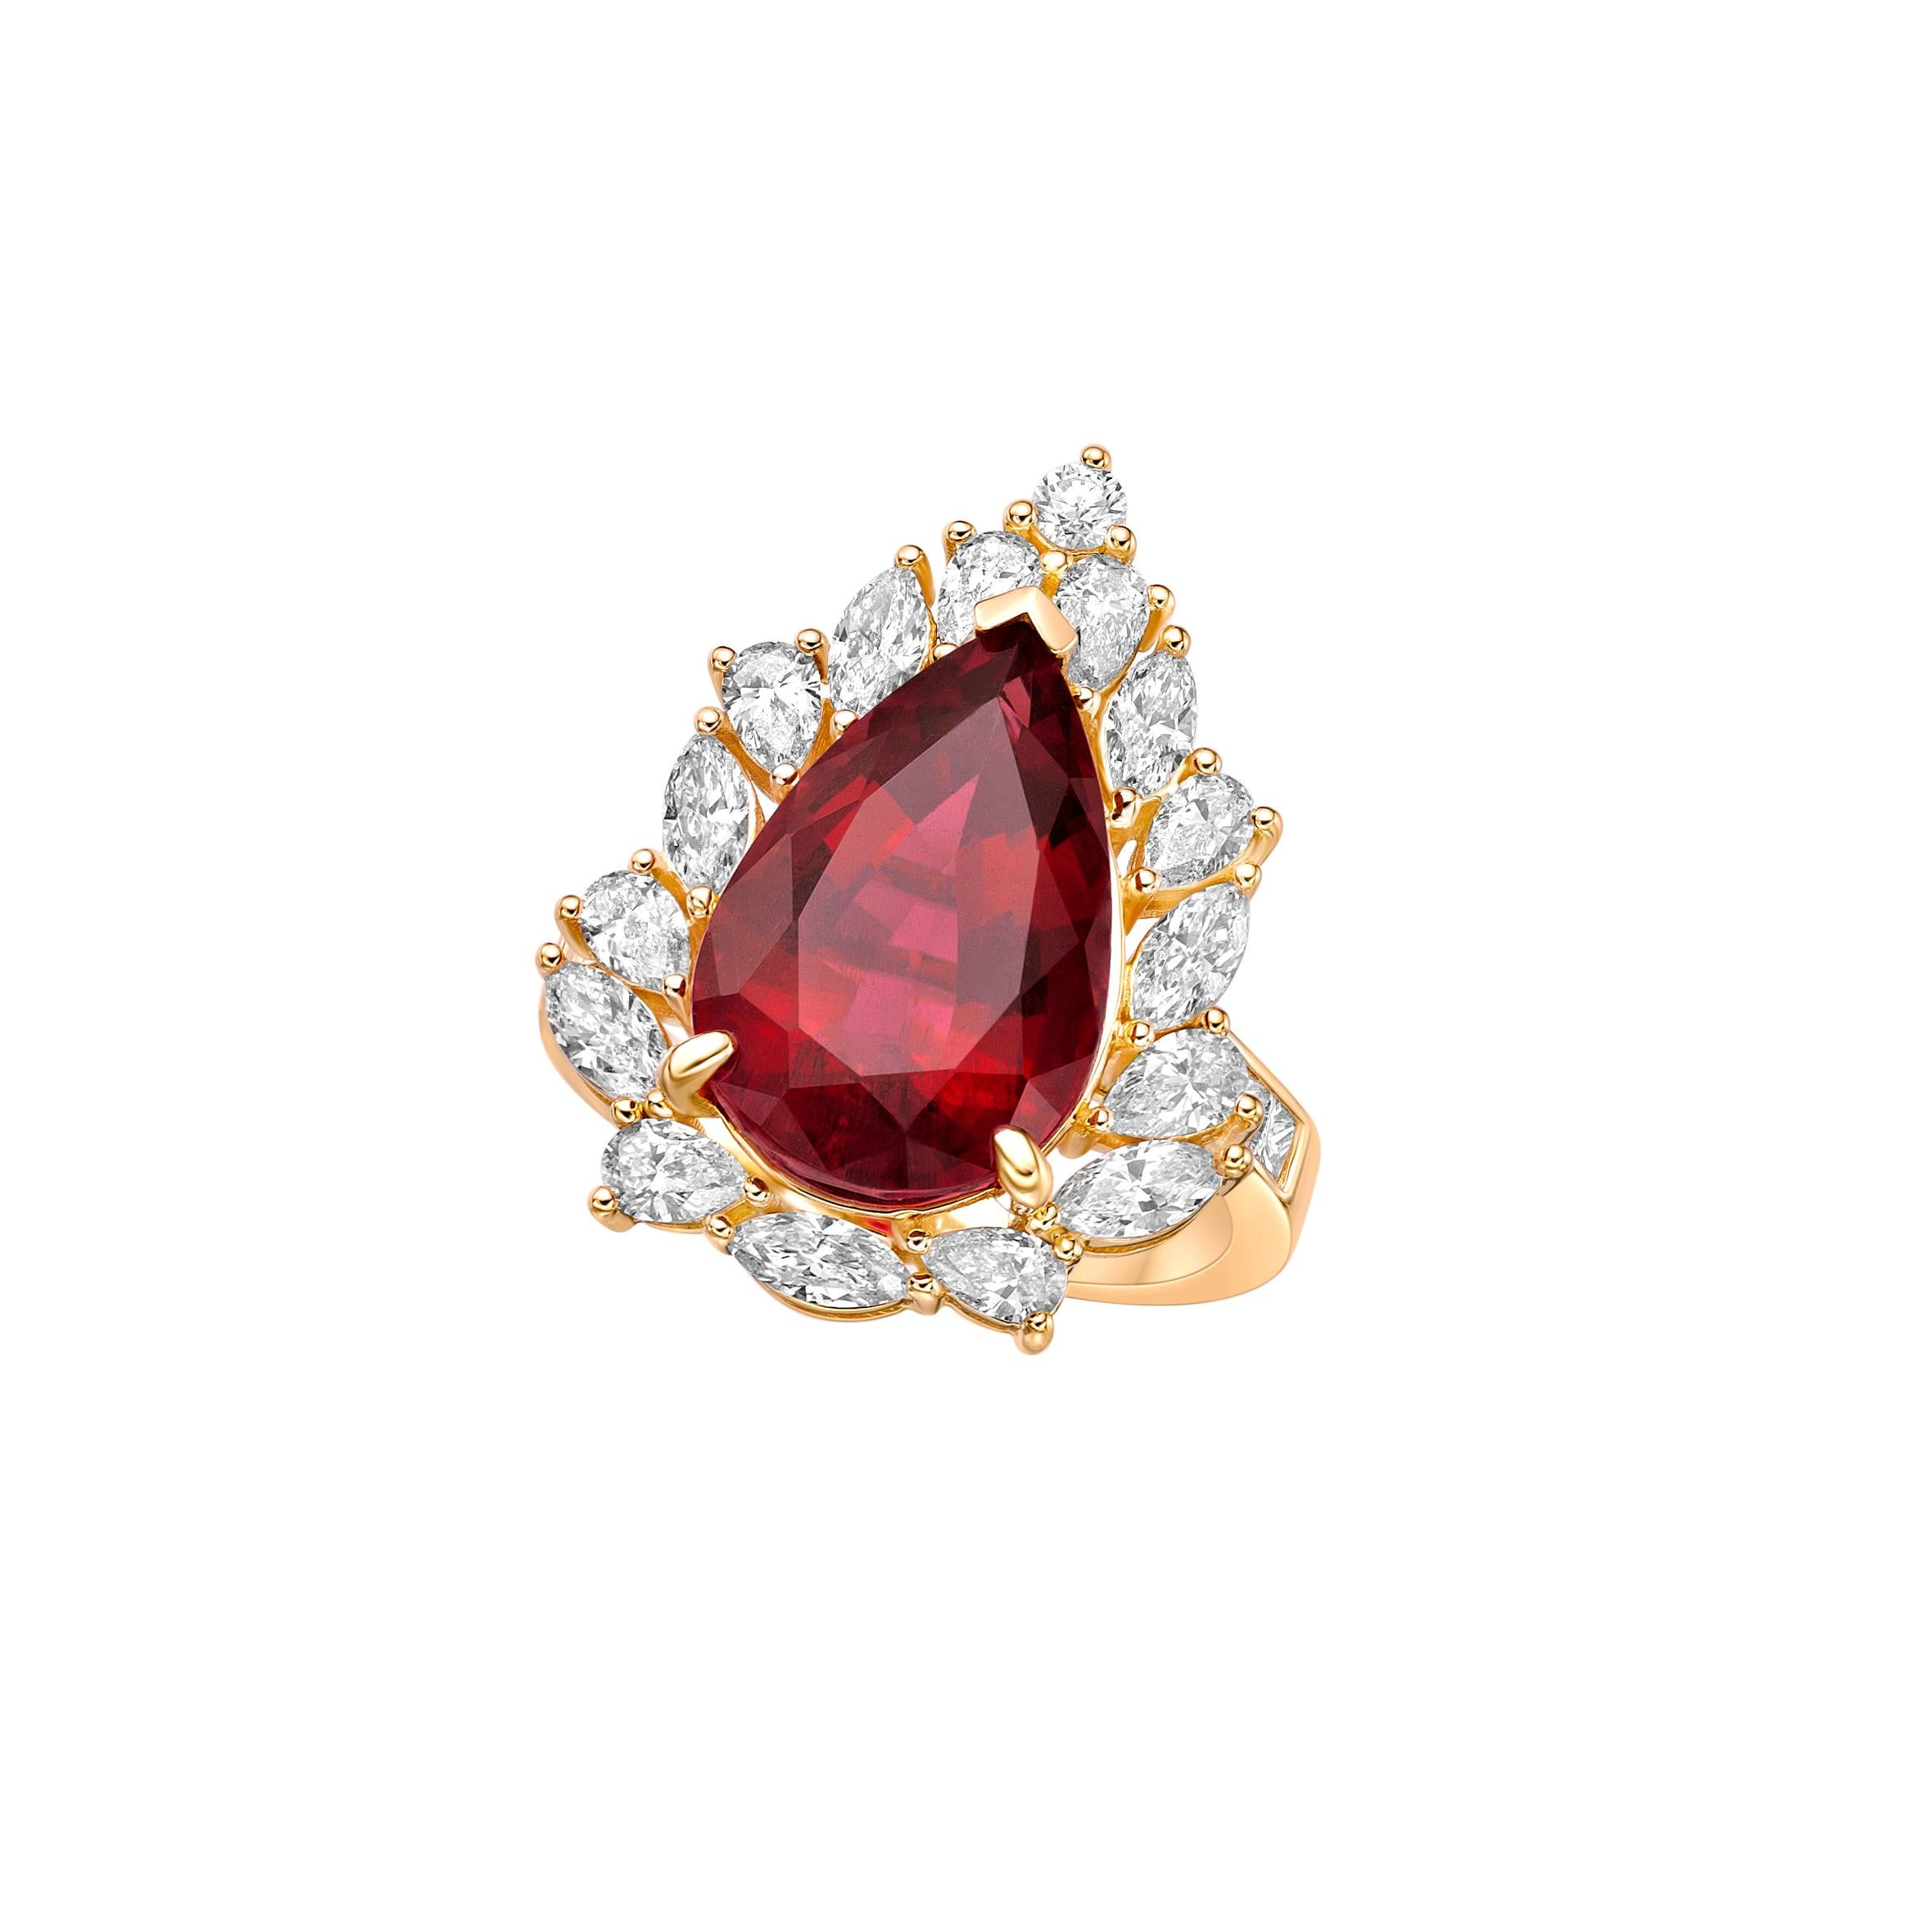 Pear Cut 7.784 Carat Rubelite Fancy Ring in 18Karat Yellow Gold with White Diamond. For Sale